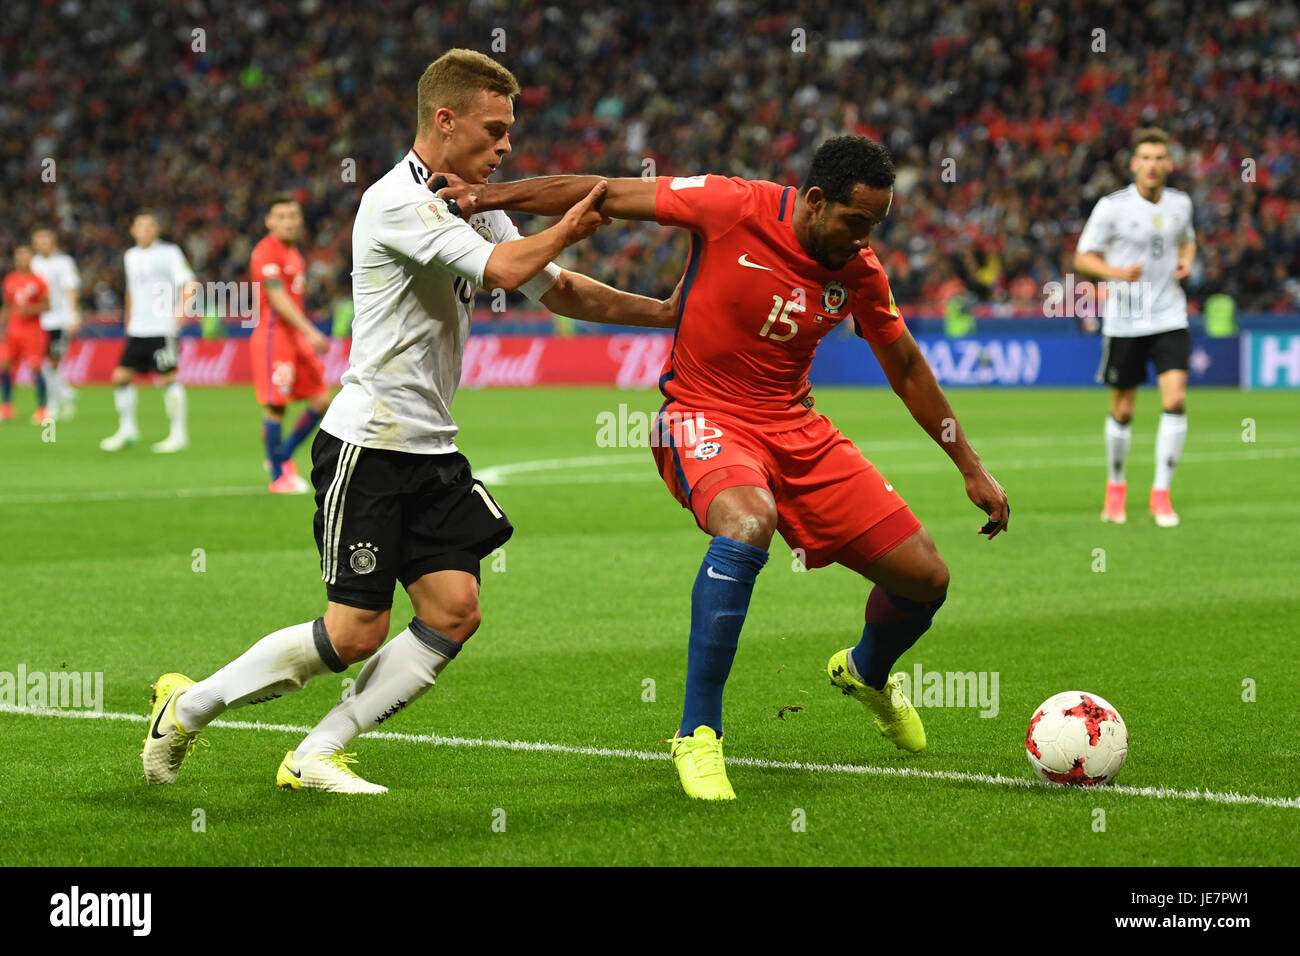 Kazan, Russia. 22nd June, 2017. Germany's Joshua Kimmich (L) and Chile's Jean Beausejour vie for the ball during the Group B preliminary stage soccer match between Chile and Germany at the Confederations Cup in Kazan, Russia, 22 June 2017. Photo: Marius Becker/dpa/Alamy Live News Stock Photo